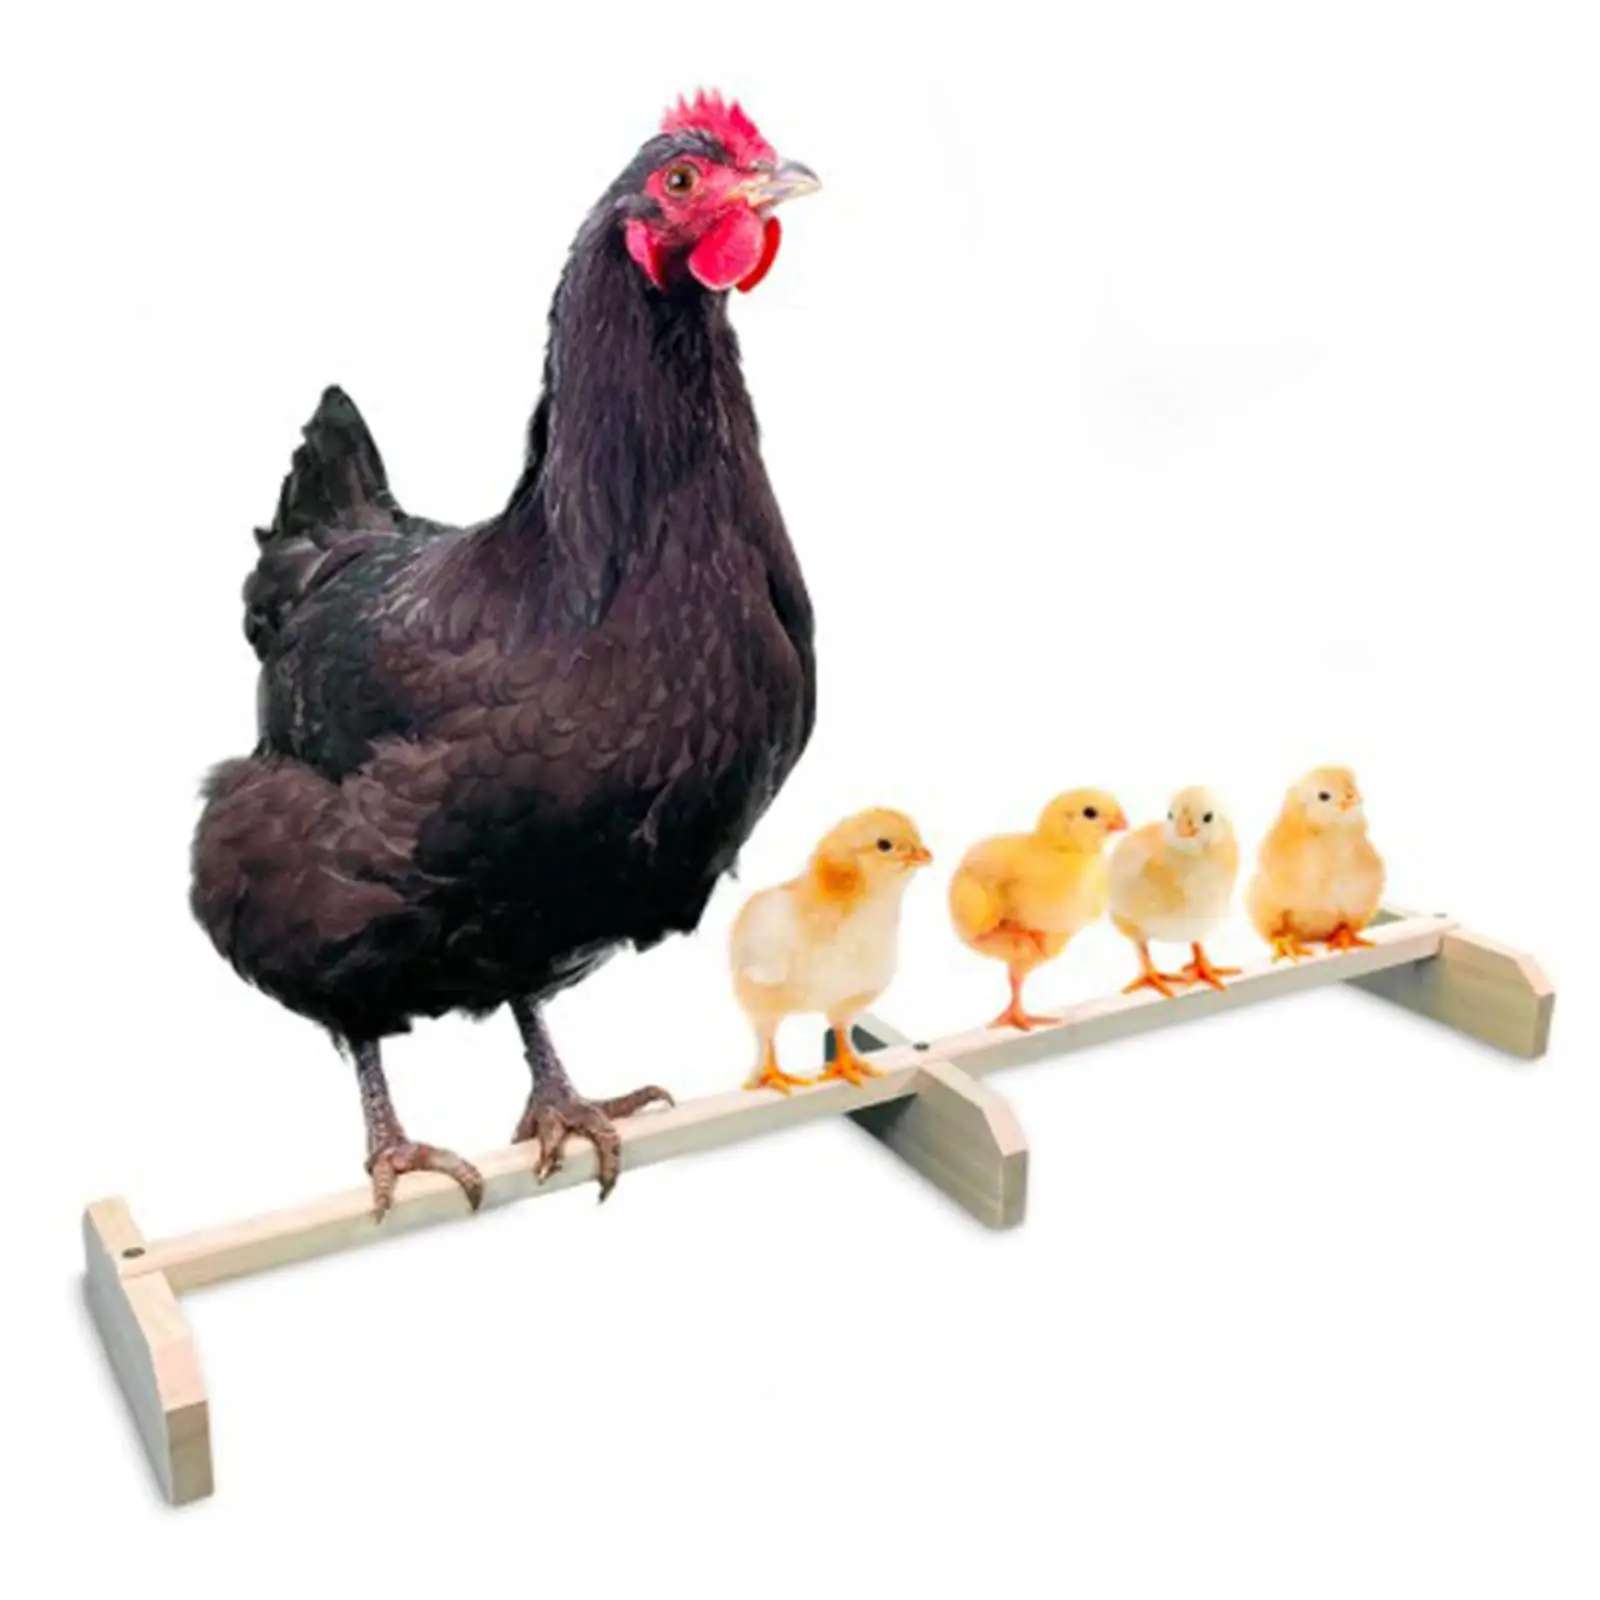 Chicken Perch Wooden Roosting Bar Bird Stand for Coop and Brooder for Large Bird Baby Chicks Parrots